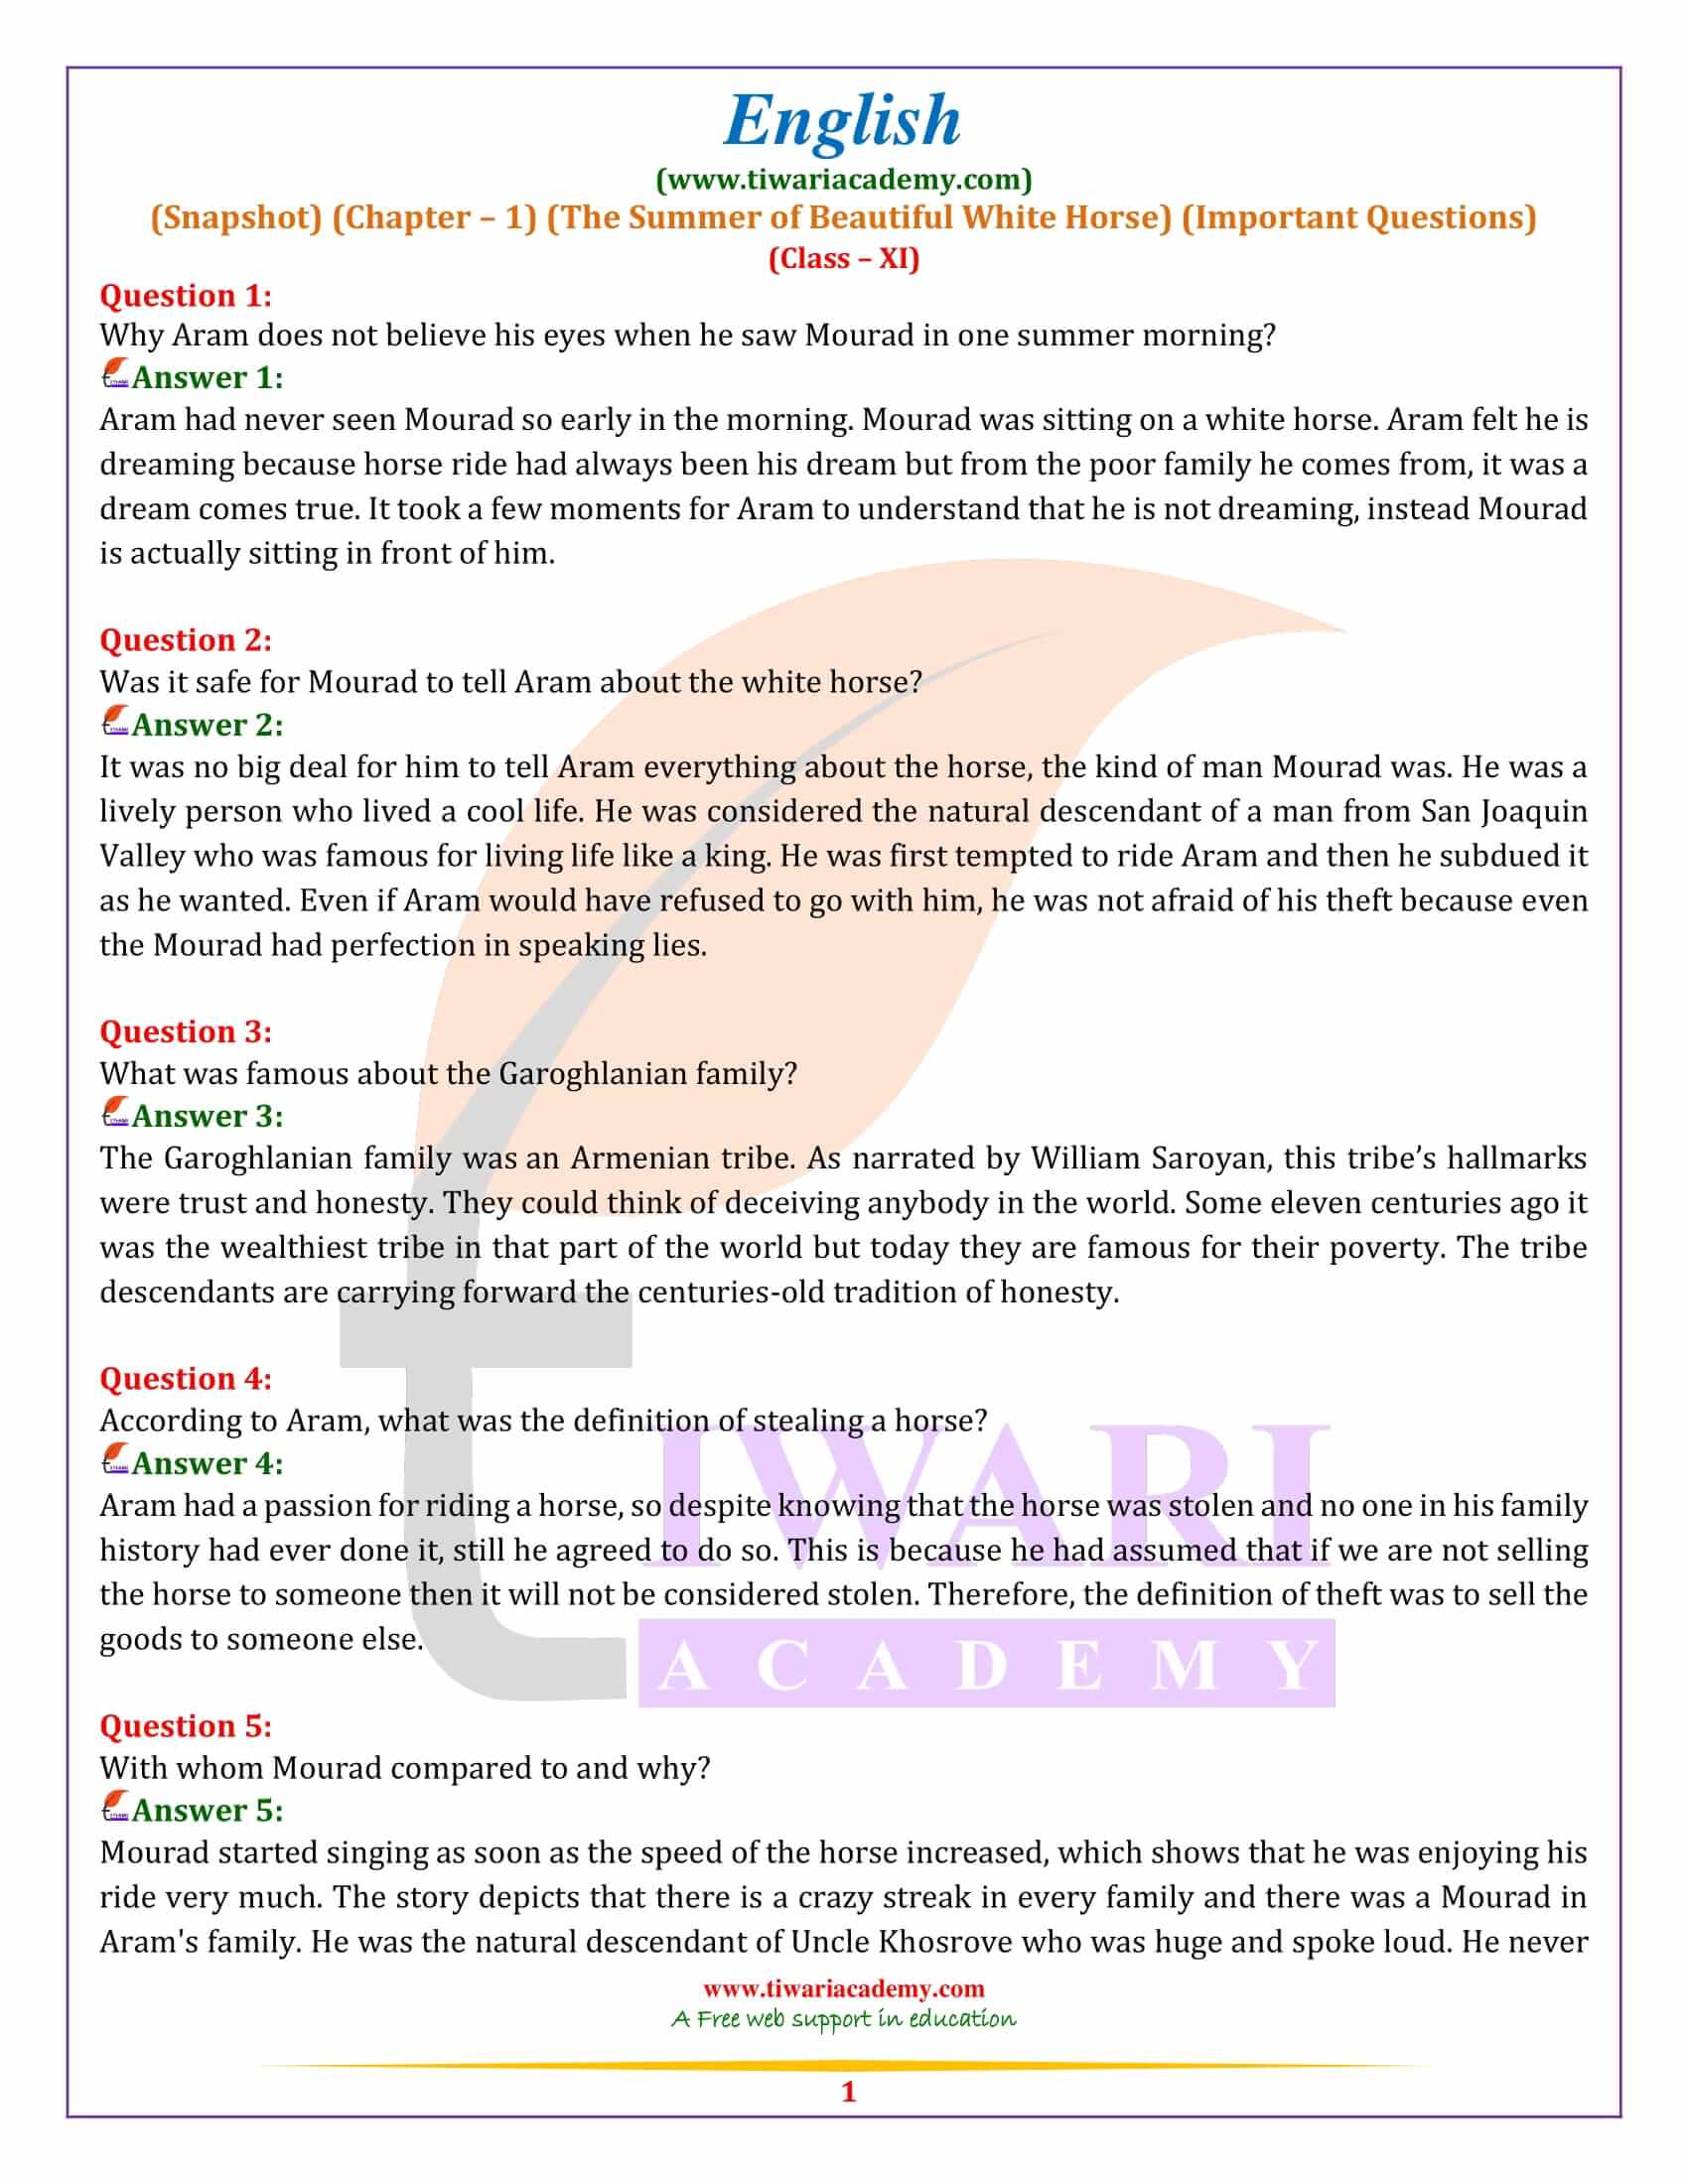 Class 11 English Snapshots Chapter 1 Practice Questions